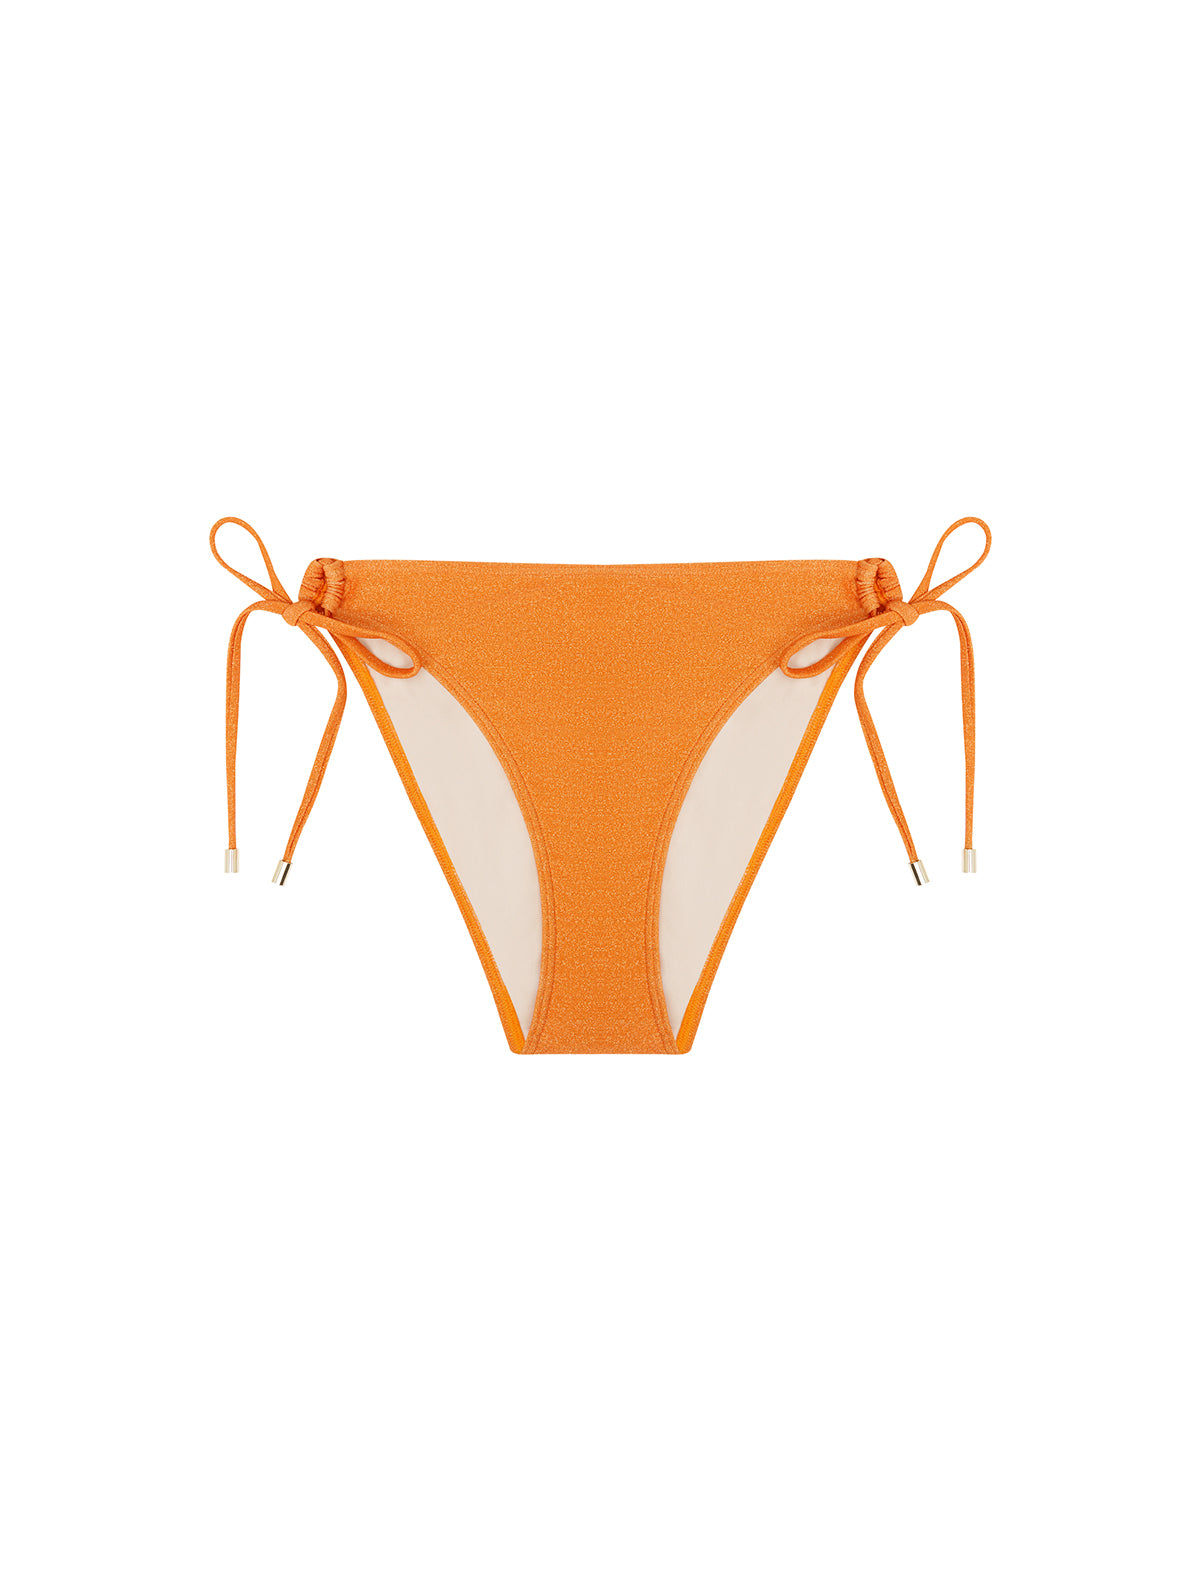 PEONY Tie Side Pant in Clementine